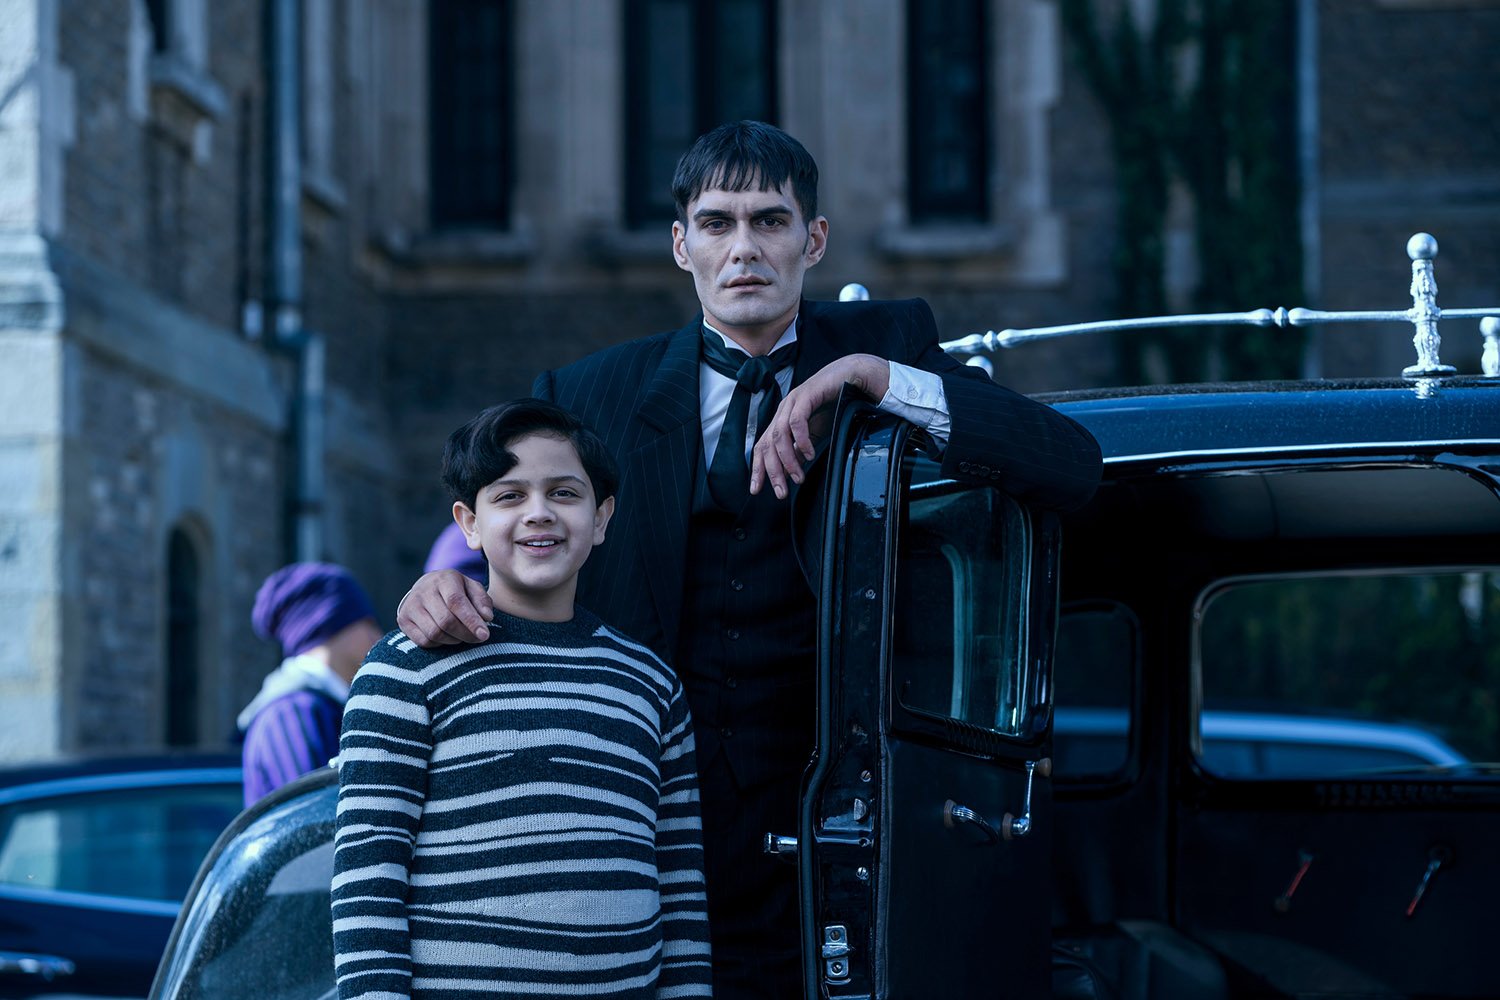 Wednesday: Issac Ordonez as Pugsley Addams standing beside George Burcea as Lurch as they wait at the family car